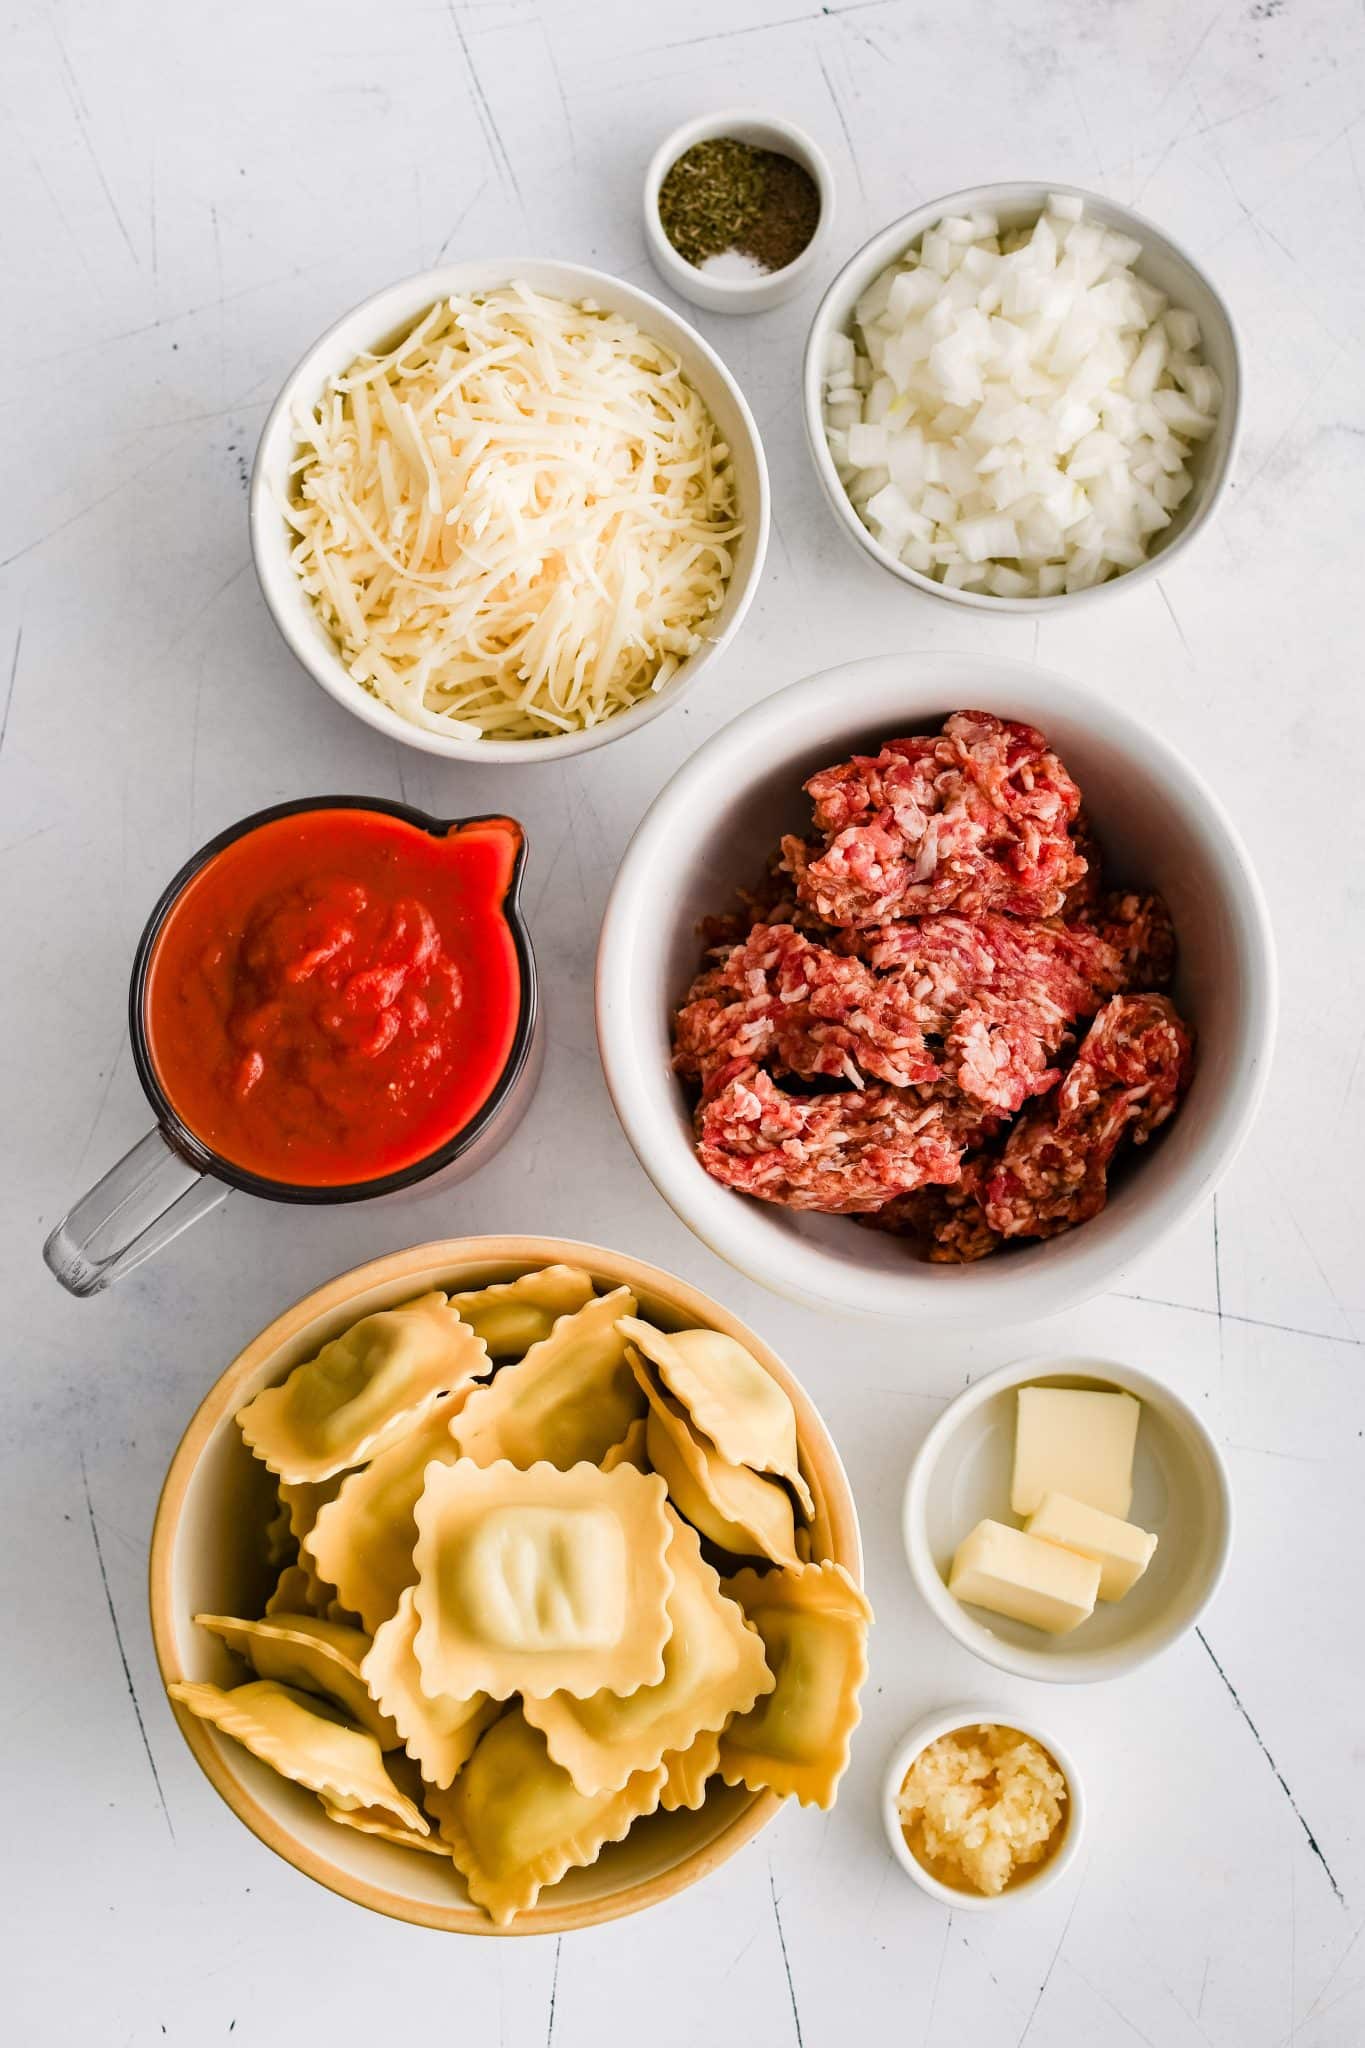 All of the ingredients for baked ravioli presented in individual measuring cups and ramekins.